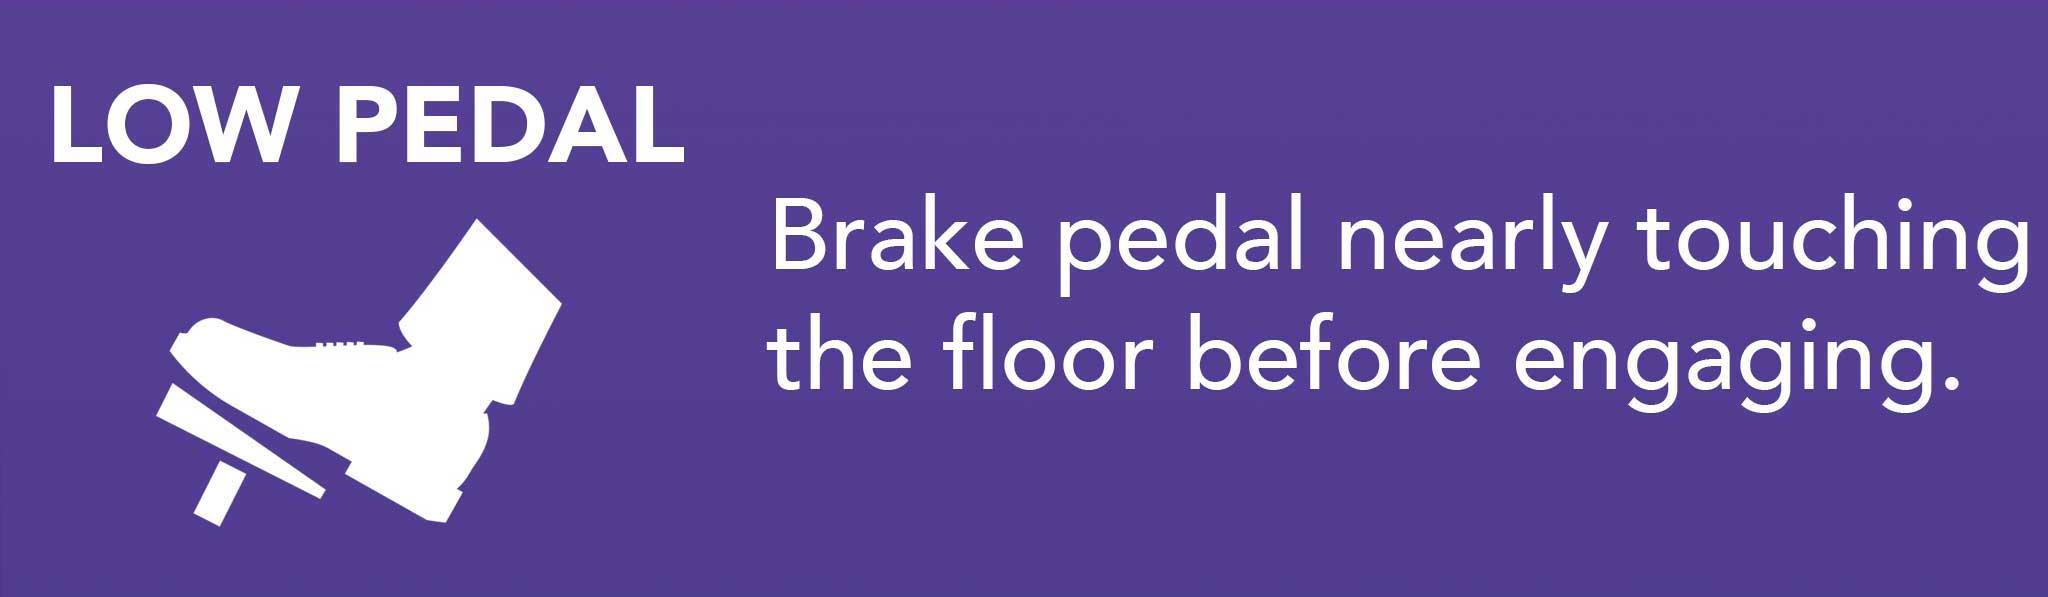 Brake pedal nearly touching the floor before engaging.